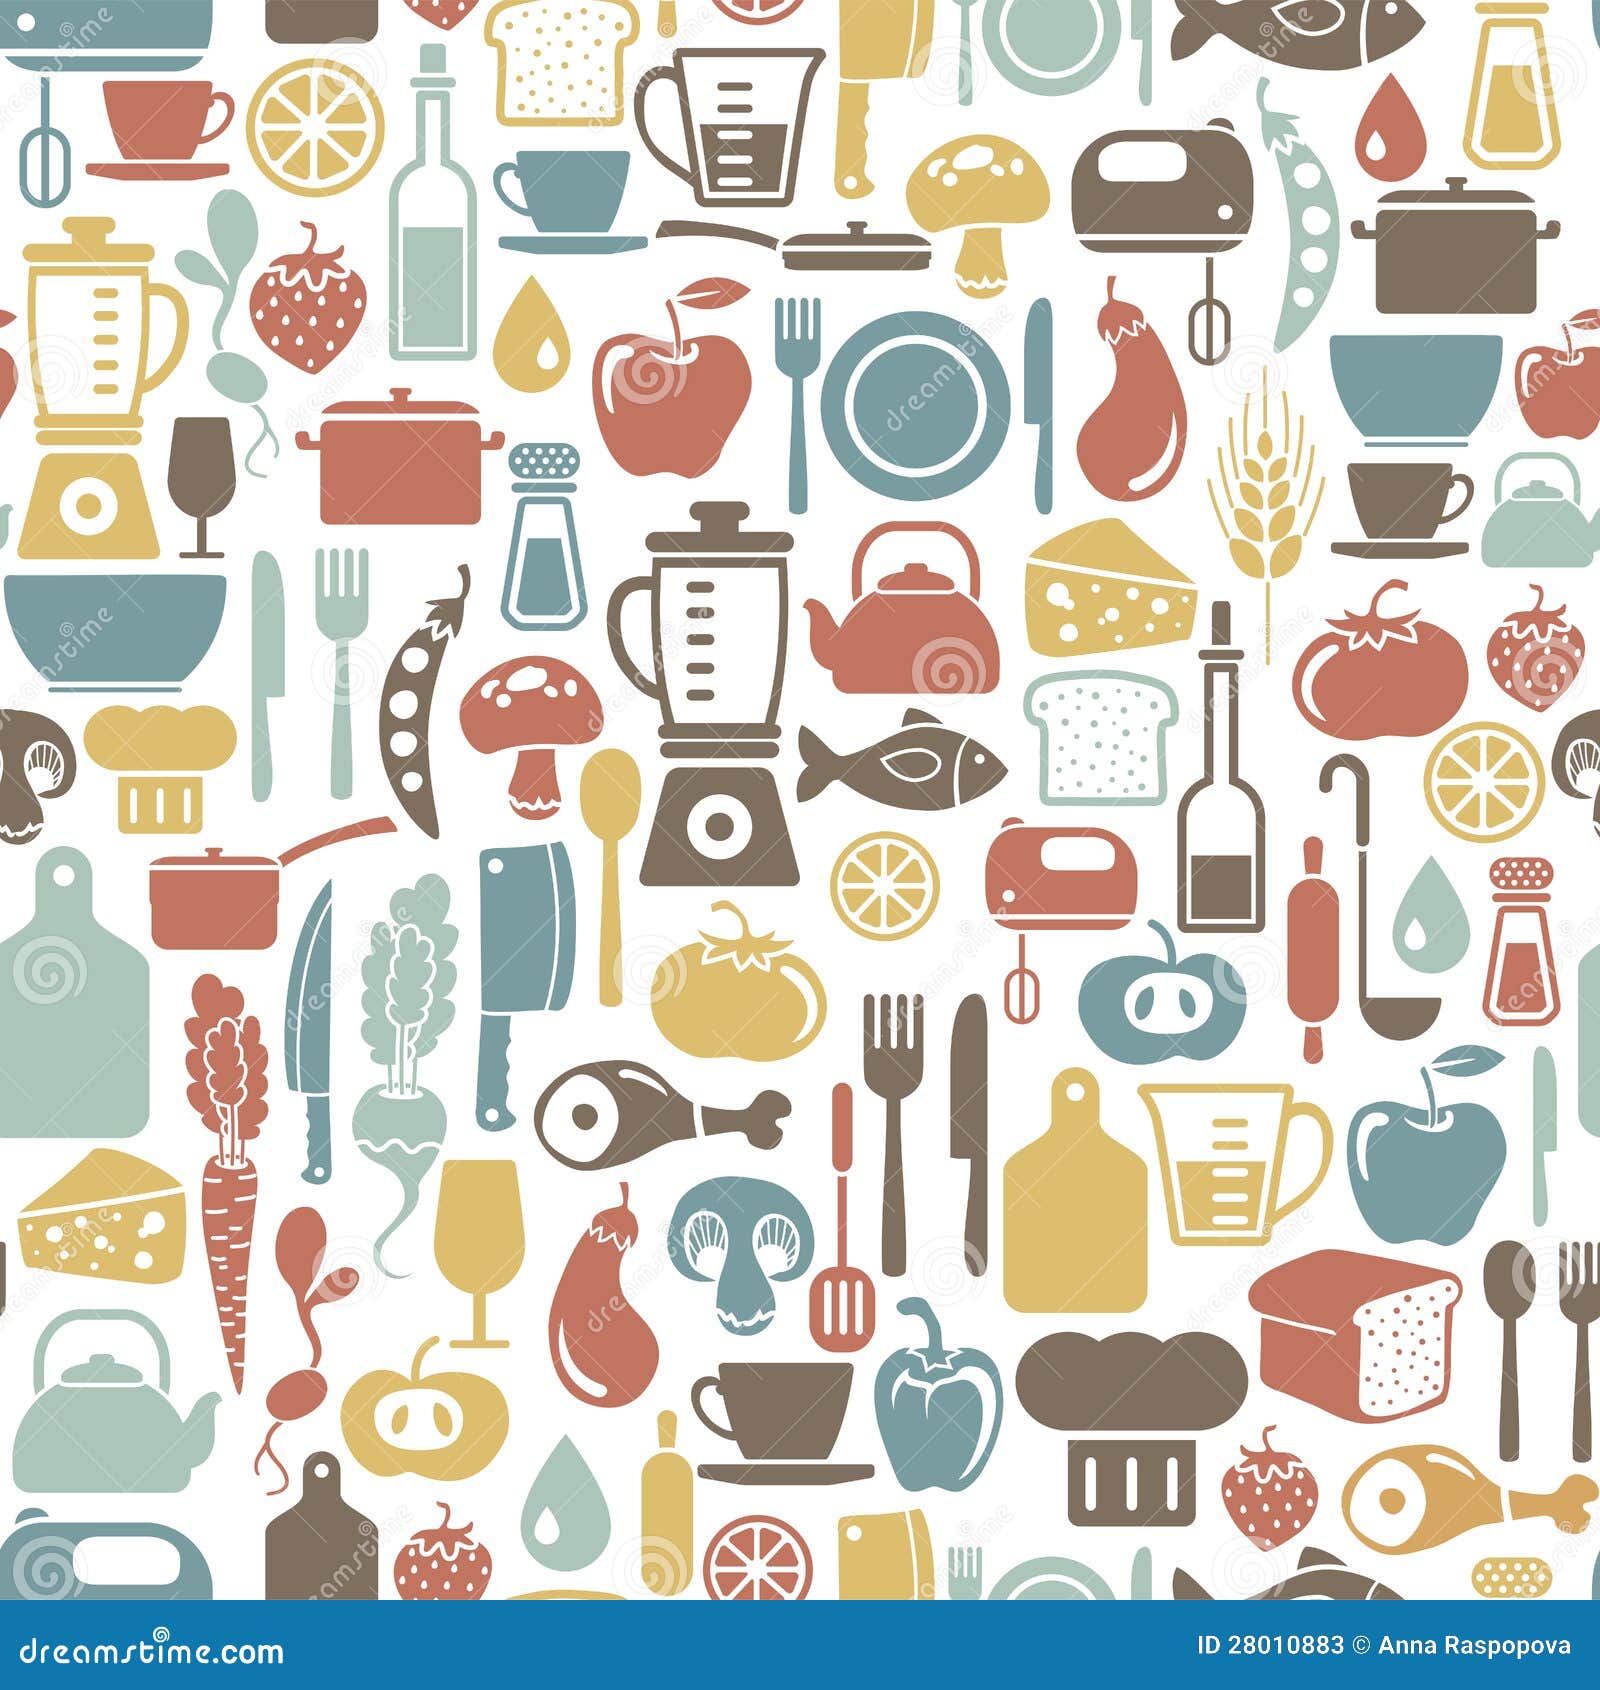 Seamless pattern with colorful food and tableware icons.